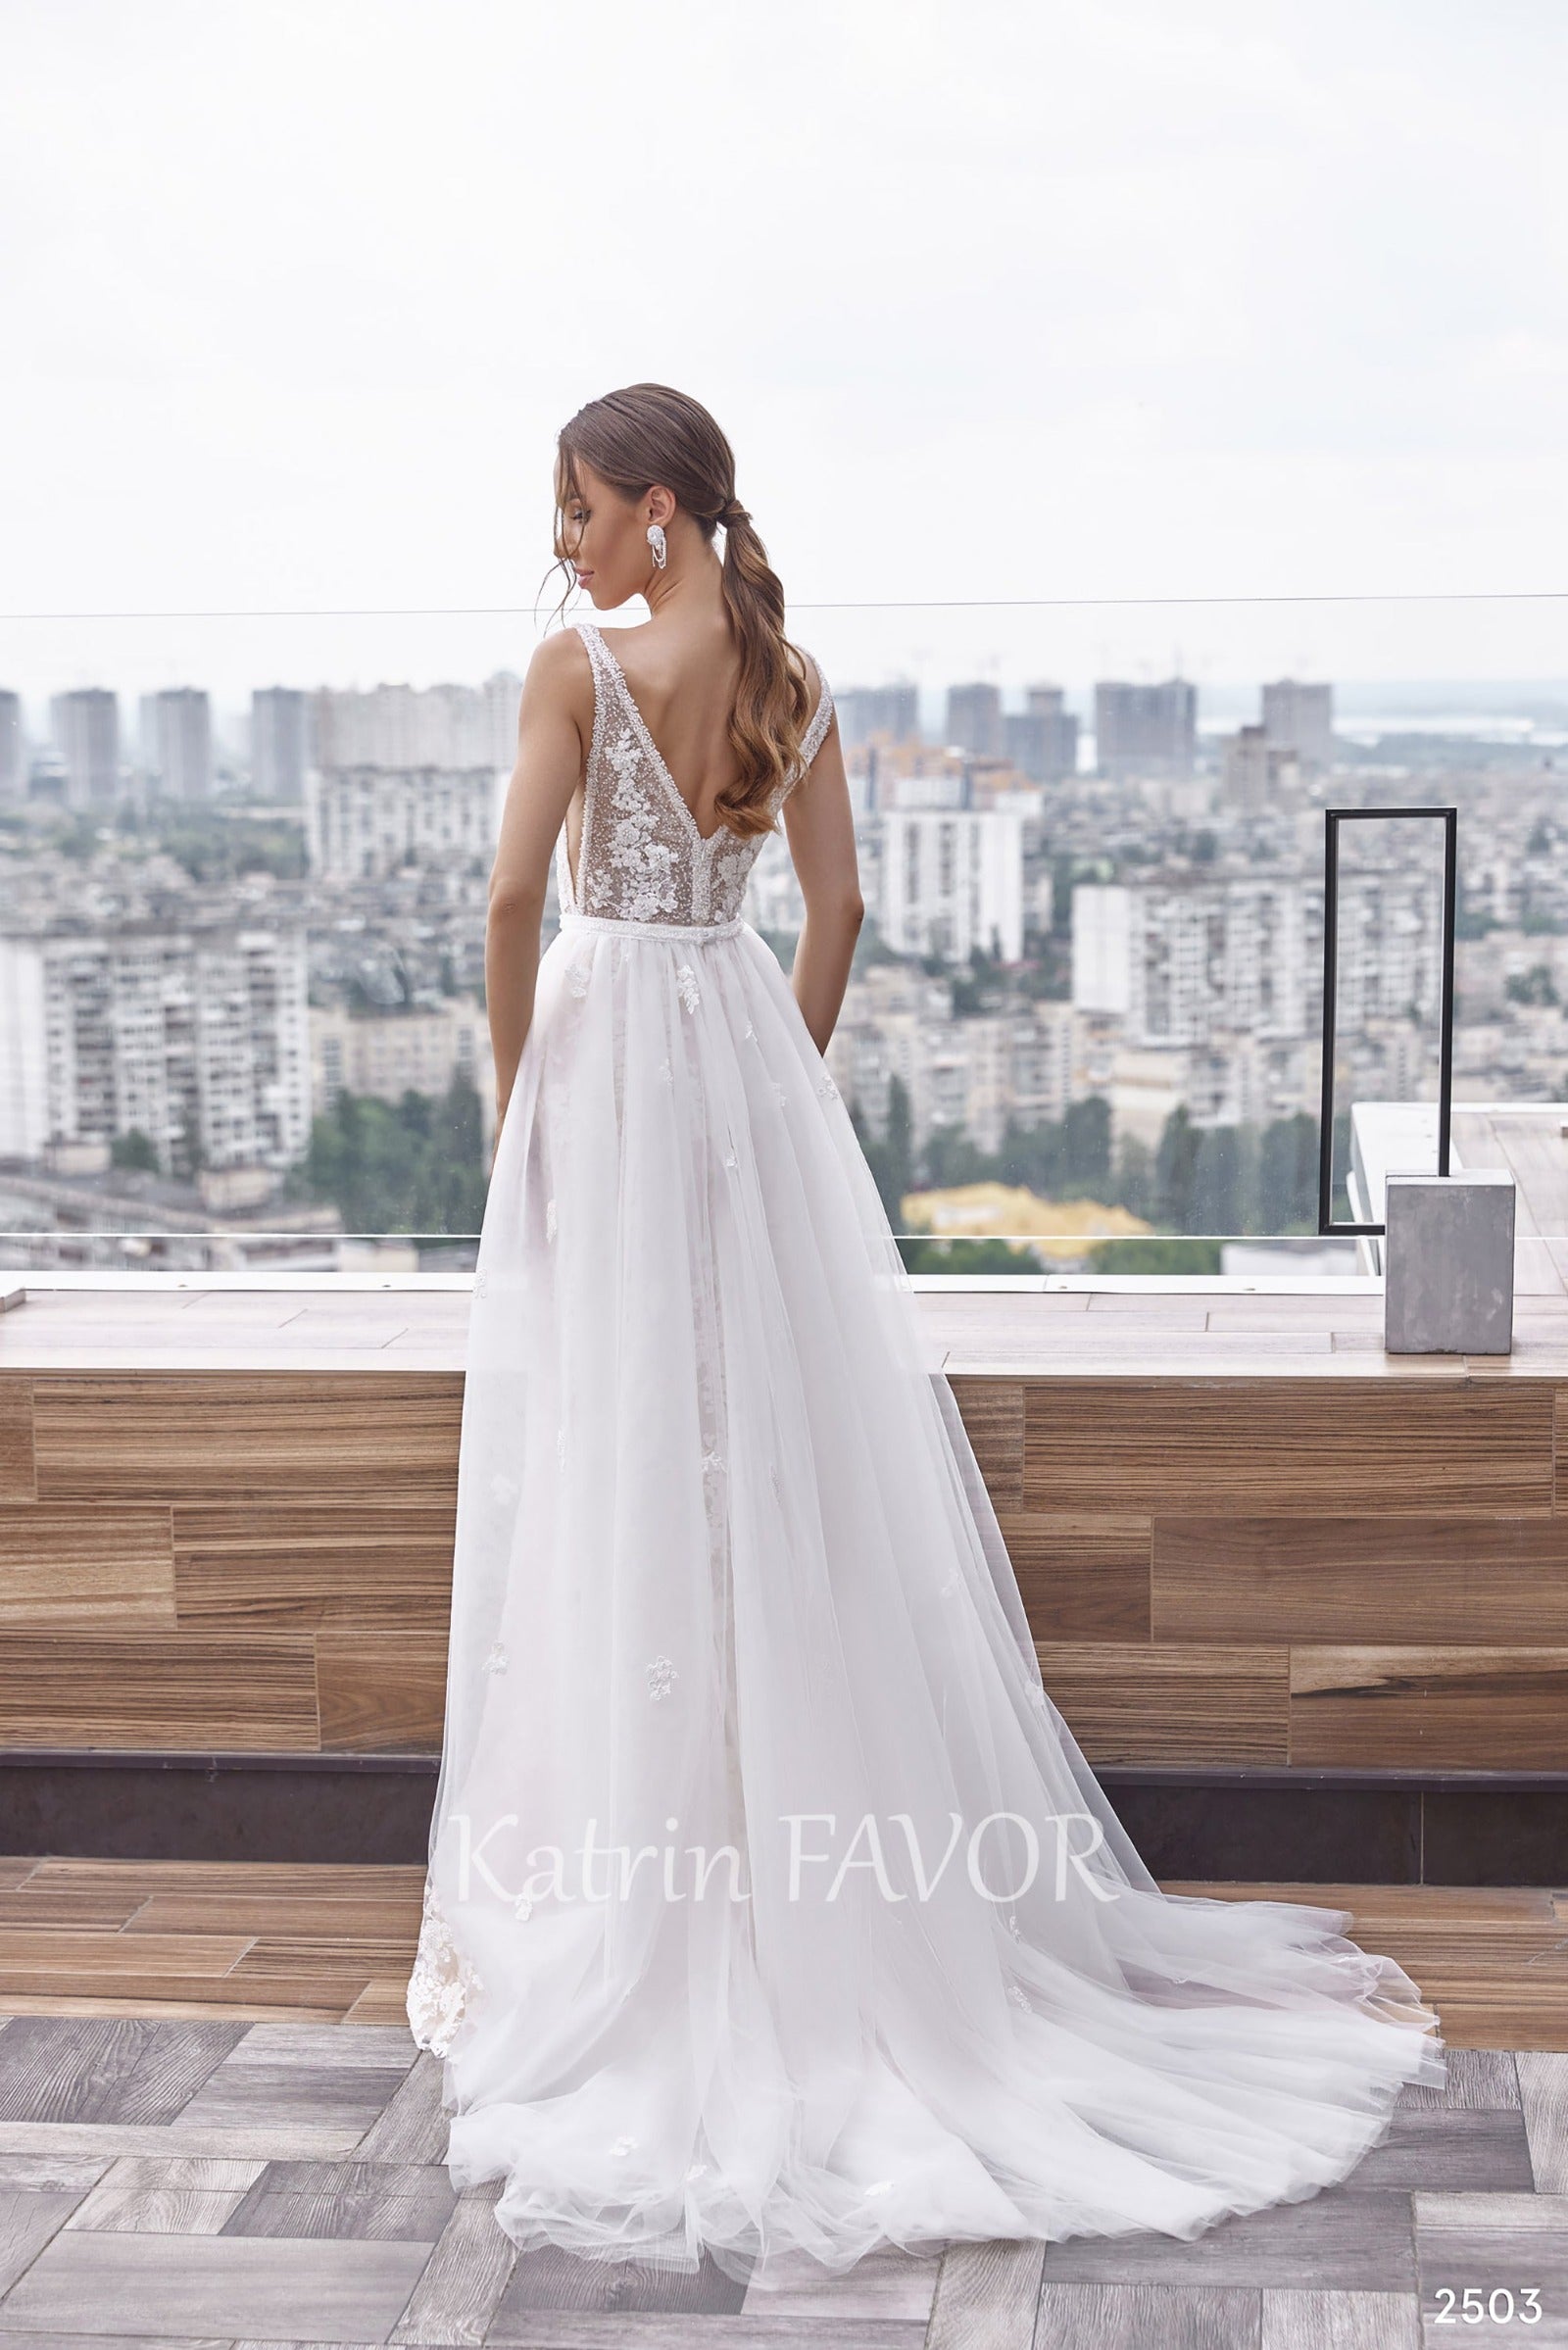 KatrinFAVORboutique-Two piece embroidered fitted wedding dress